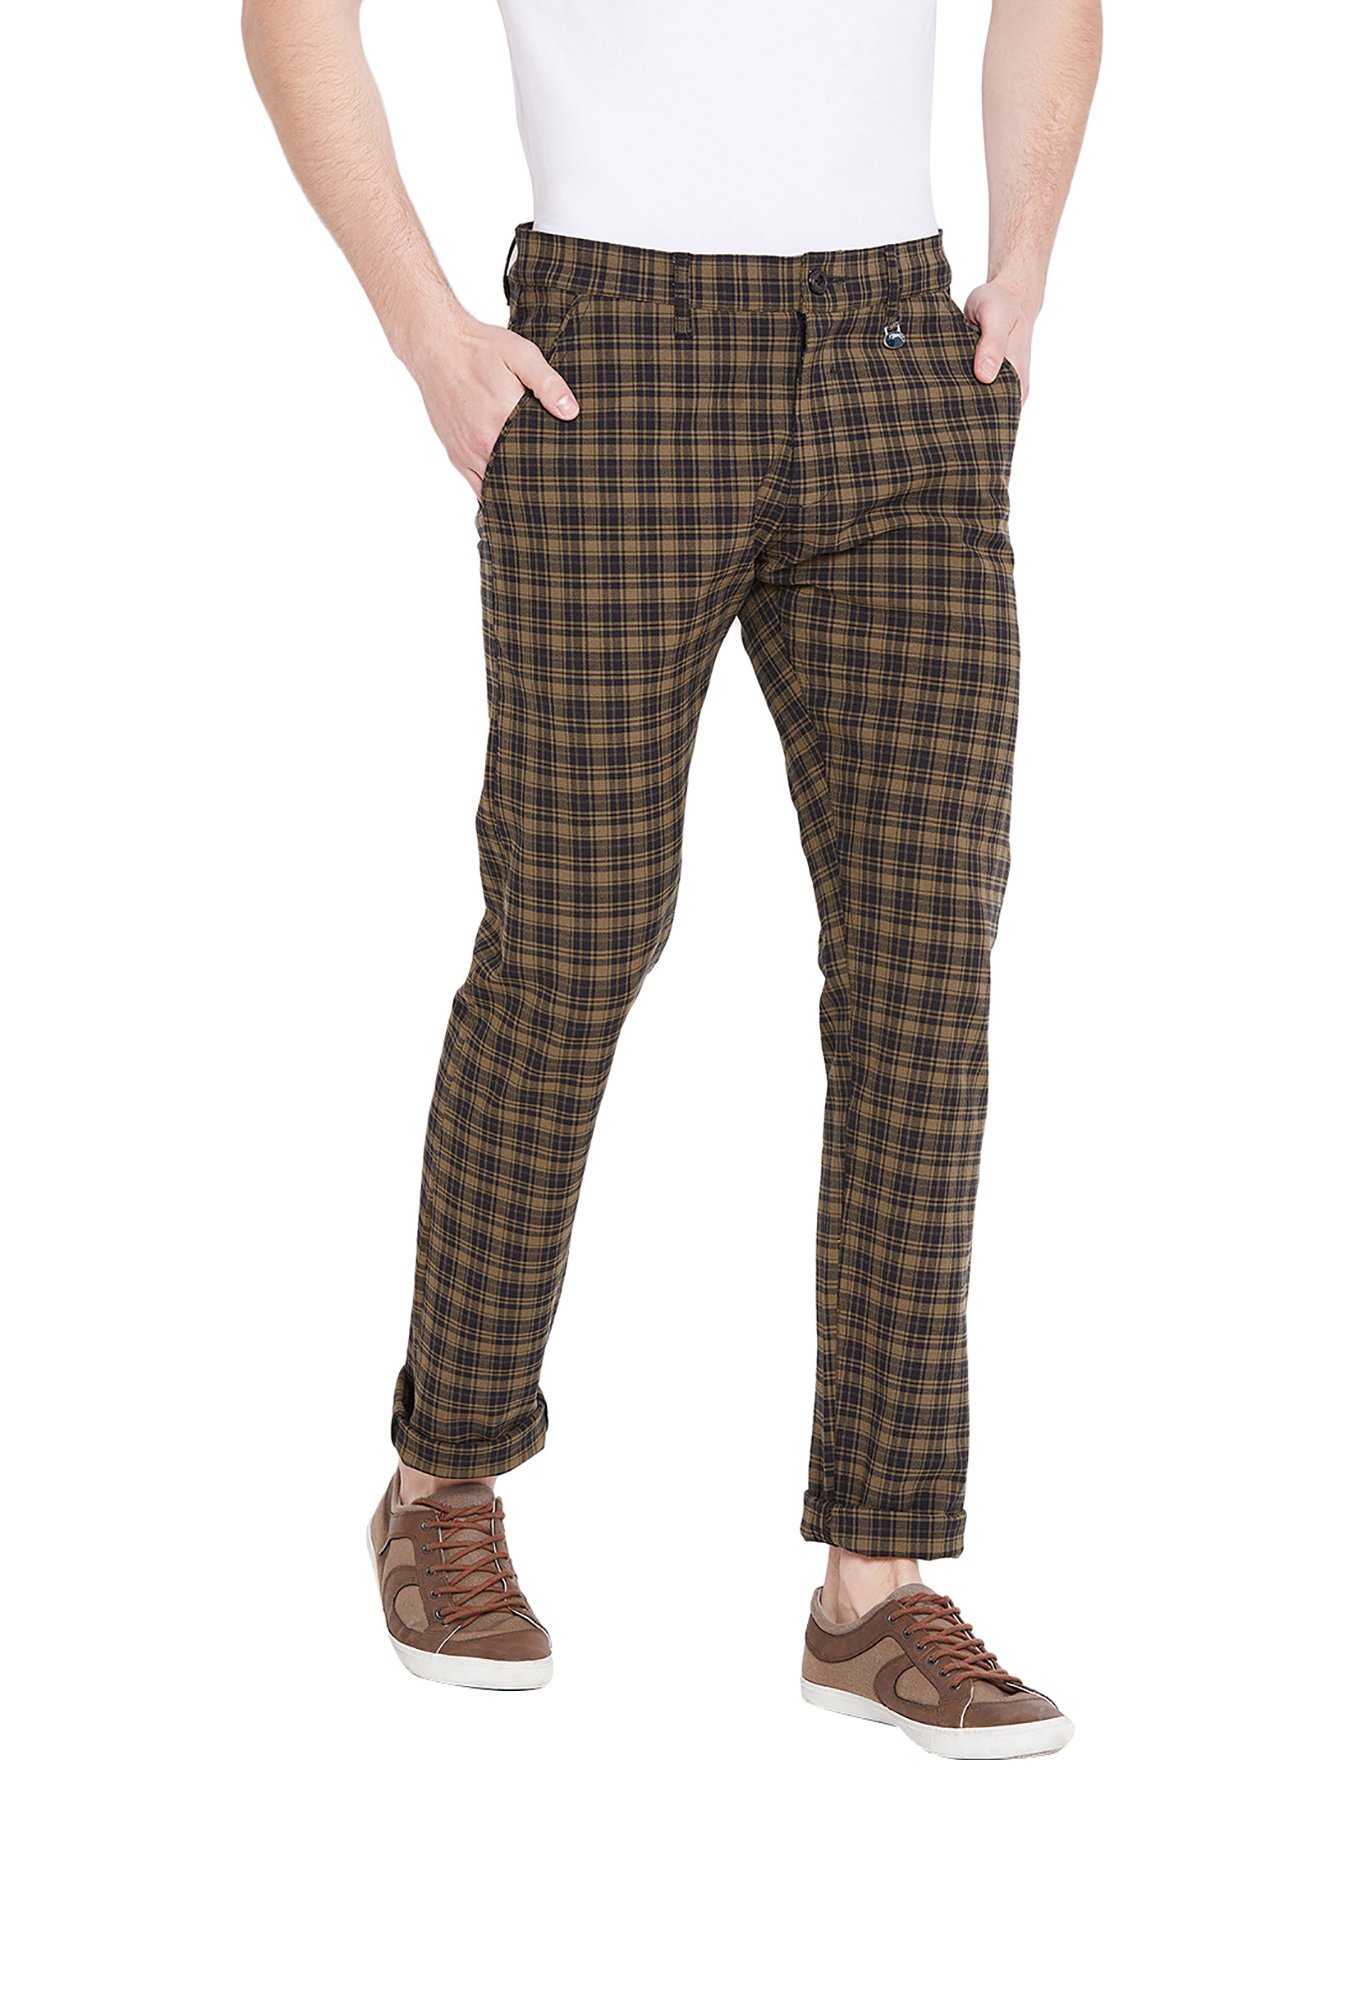 Buy INVICTUS Men Black Slim Fit Checked Formal Trousers  Trousers for Men  7149905  Myntra